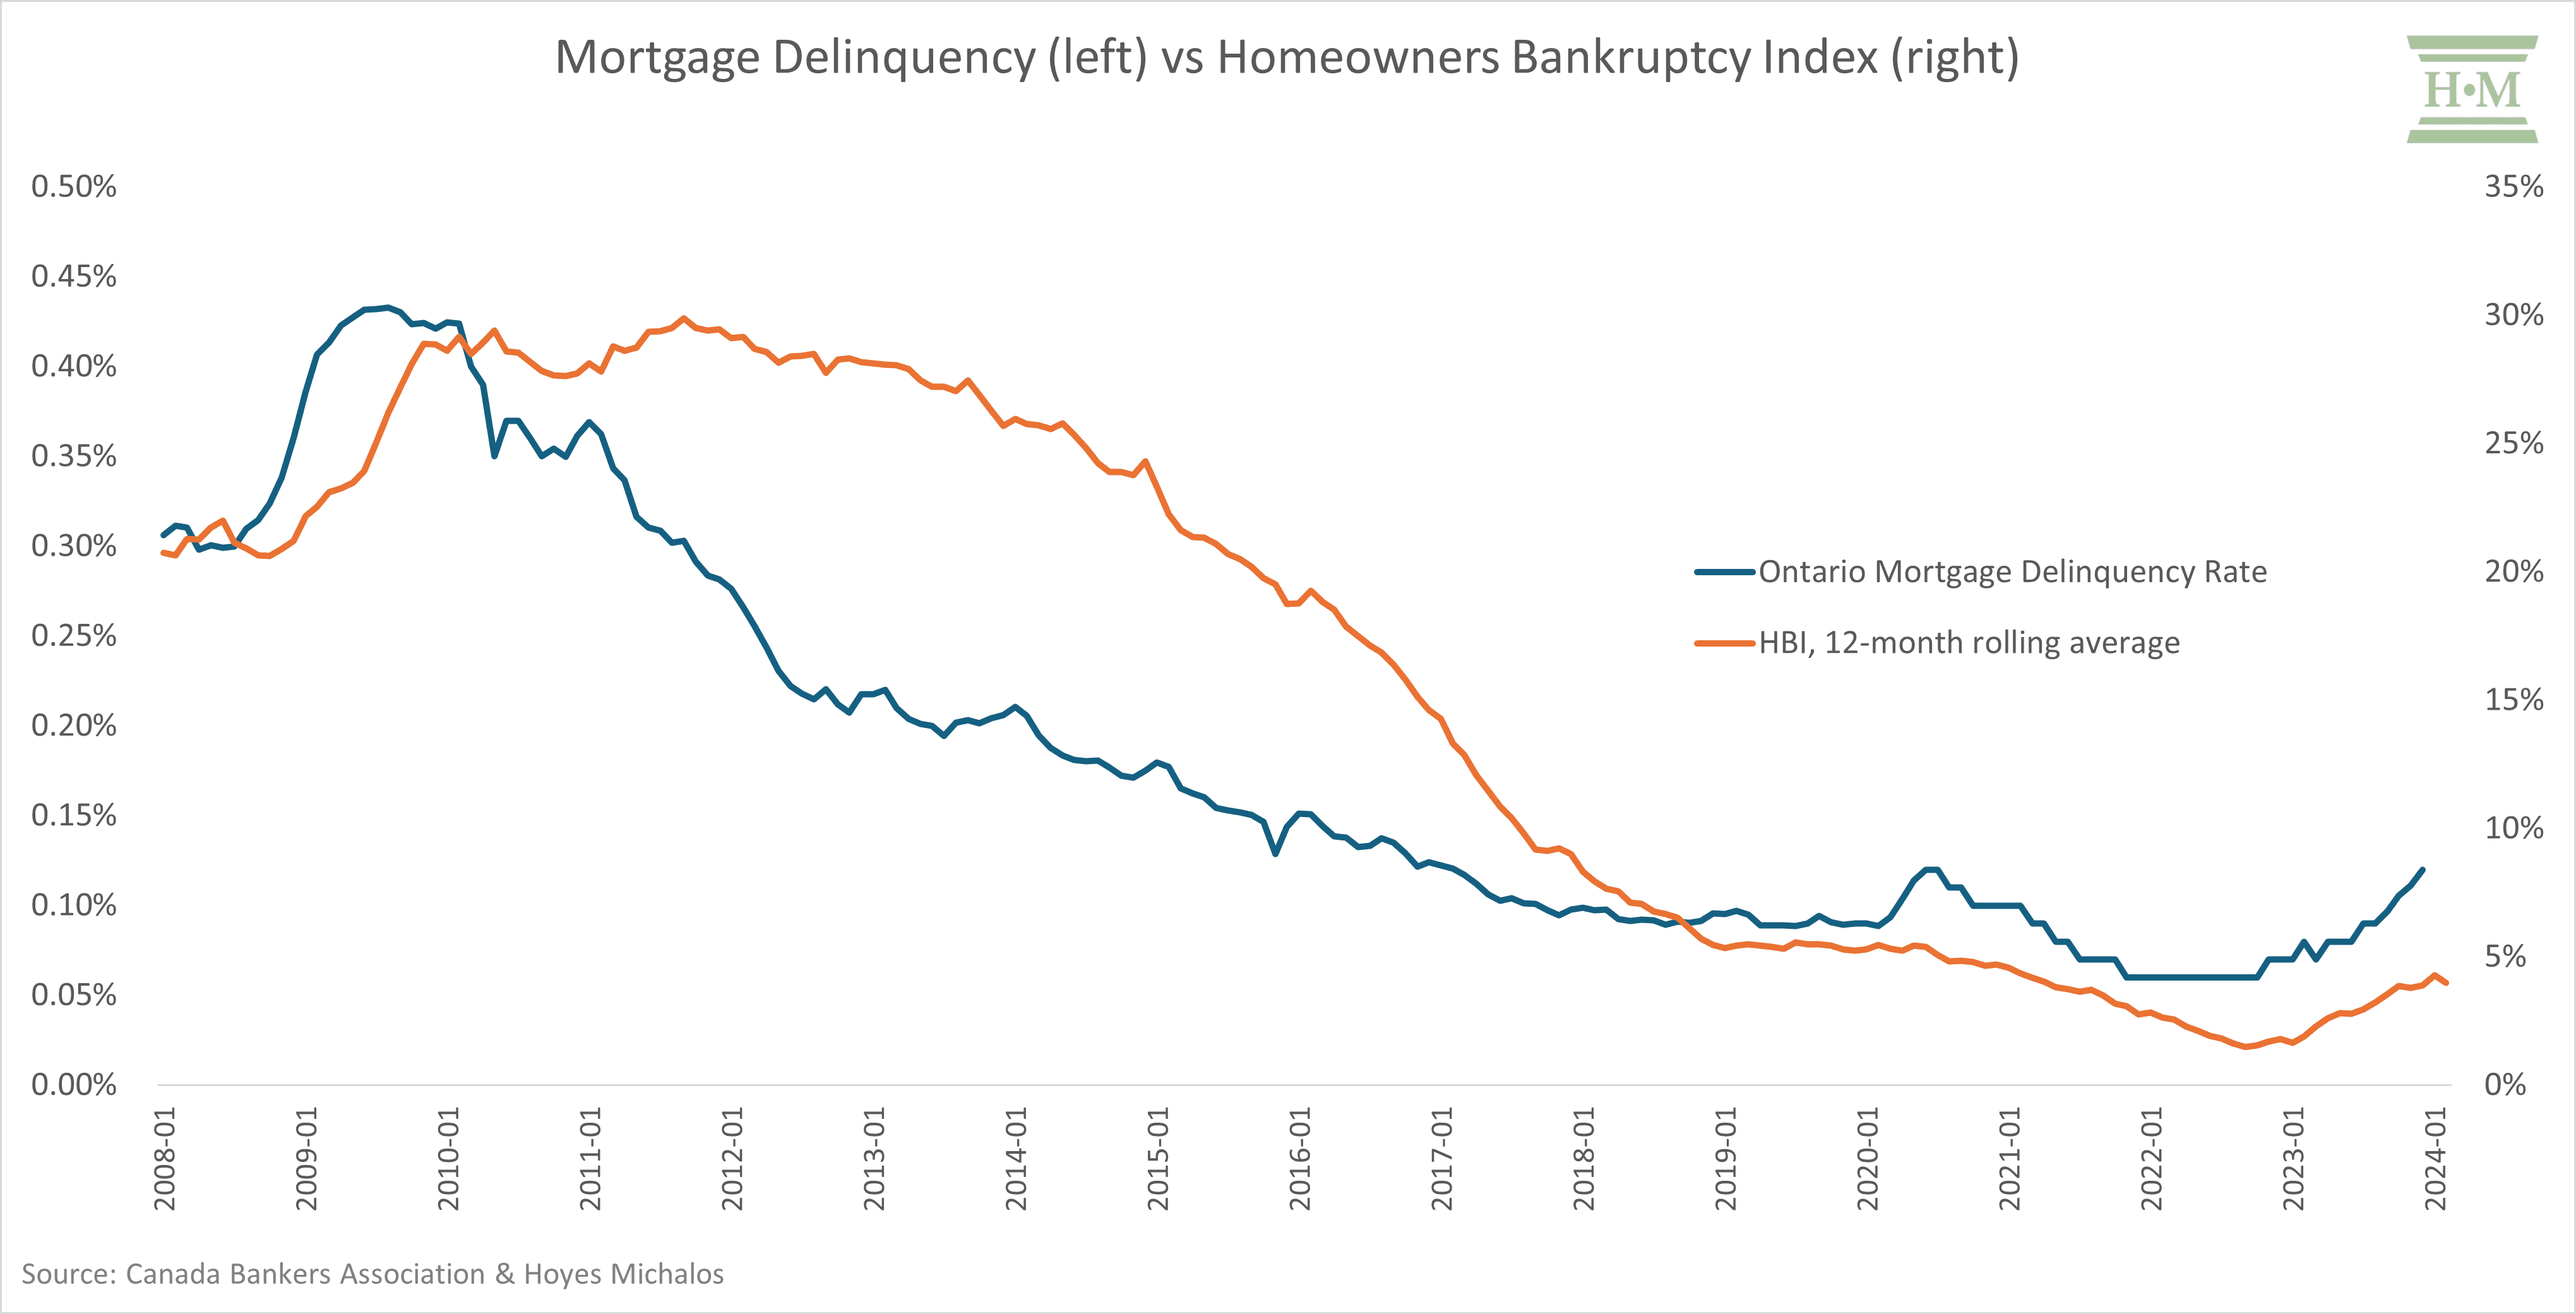 Mortgage Delinquency vs Homeowners Bankruptcy Index